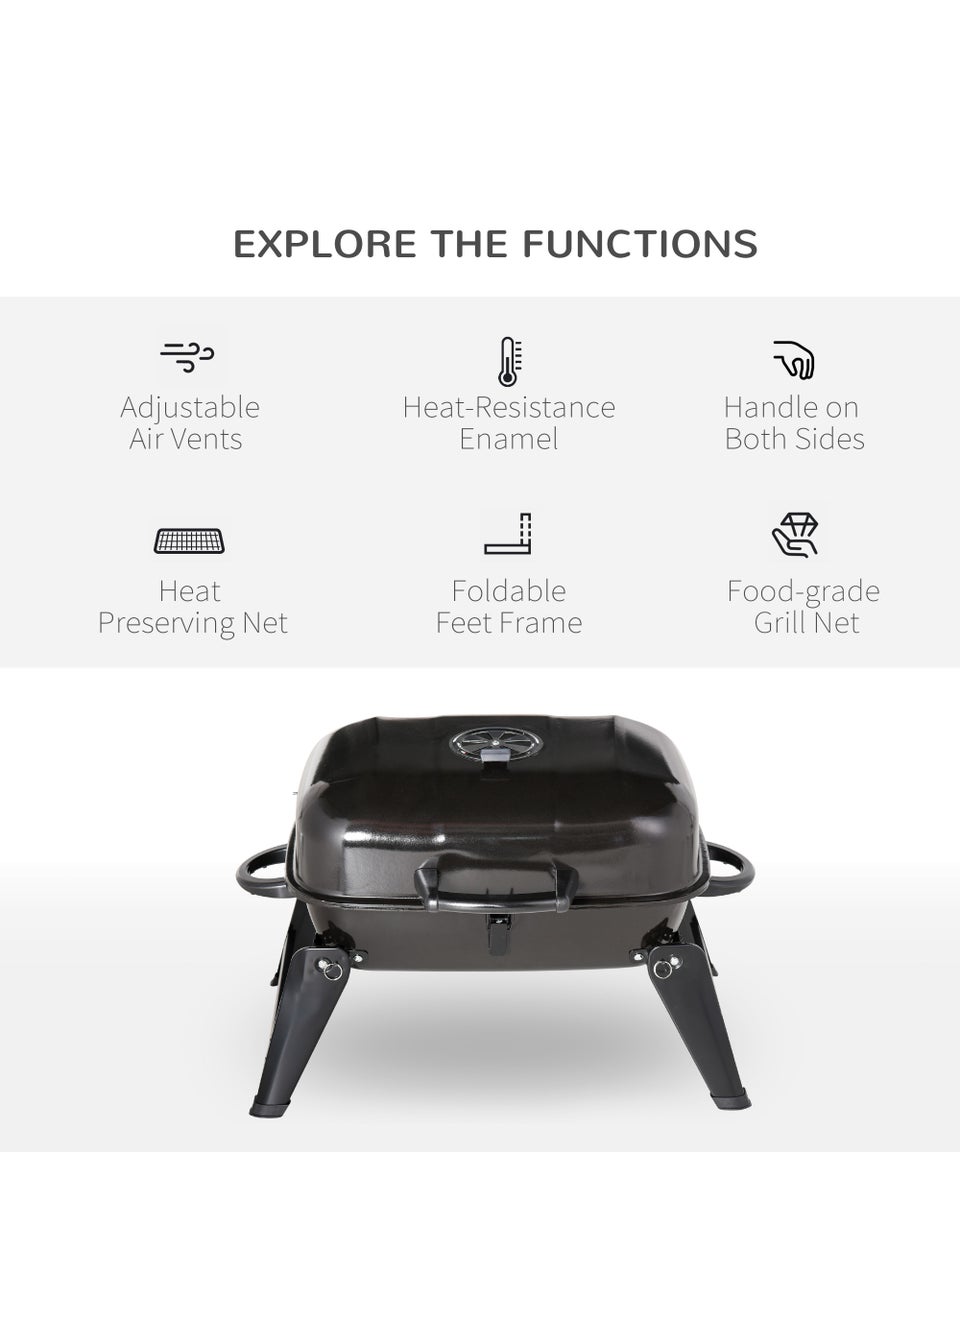 Outsunny Portable Charcoal Barbecue Grill (59cm x 43cm x 36cm)